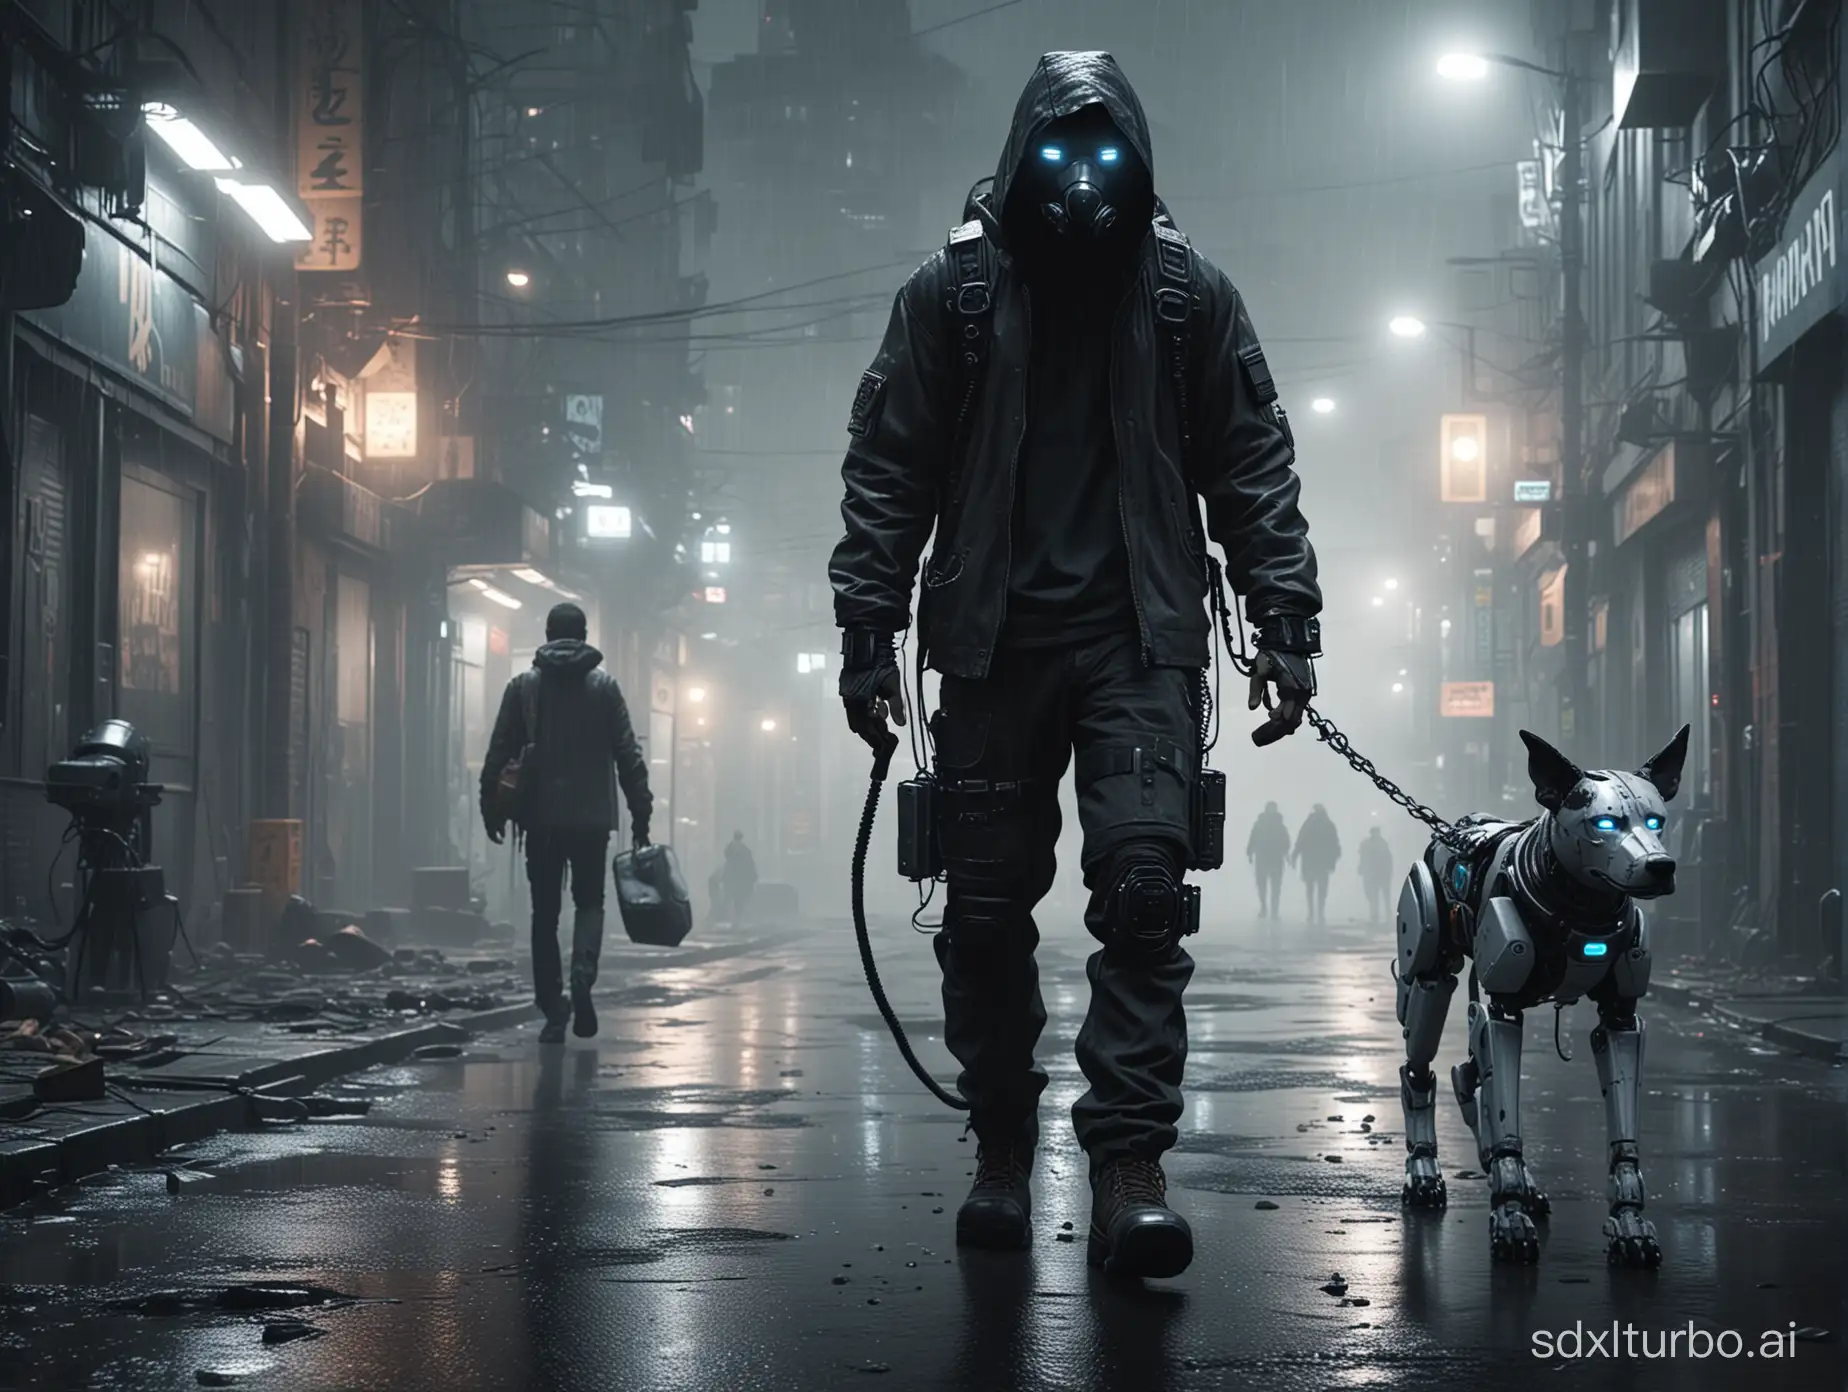 Guy with an air mask walking with a robot dog on a leash in Dystopian cyberpunk poor city, night, dark ambiance, 8K, Hyper realistic, rainy, cinematic